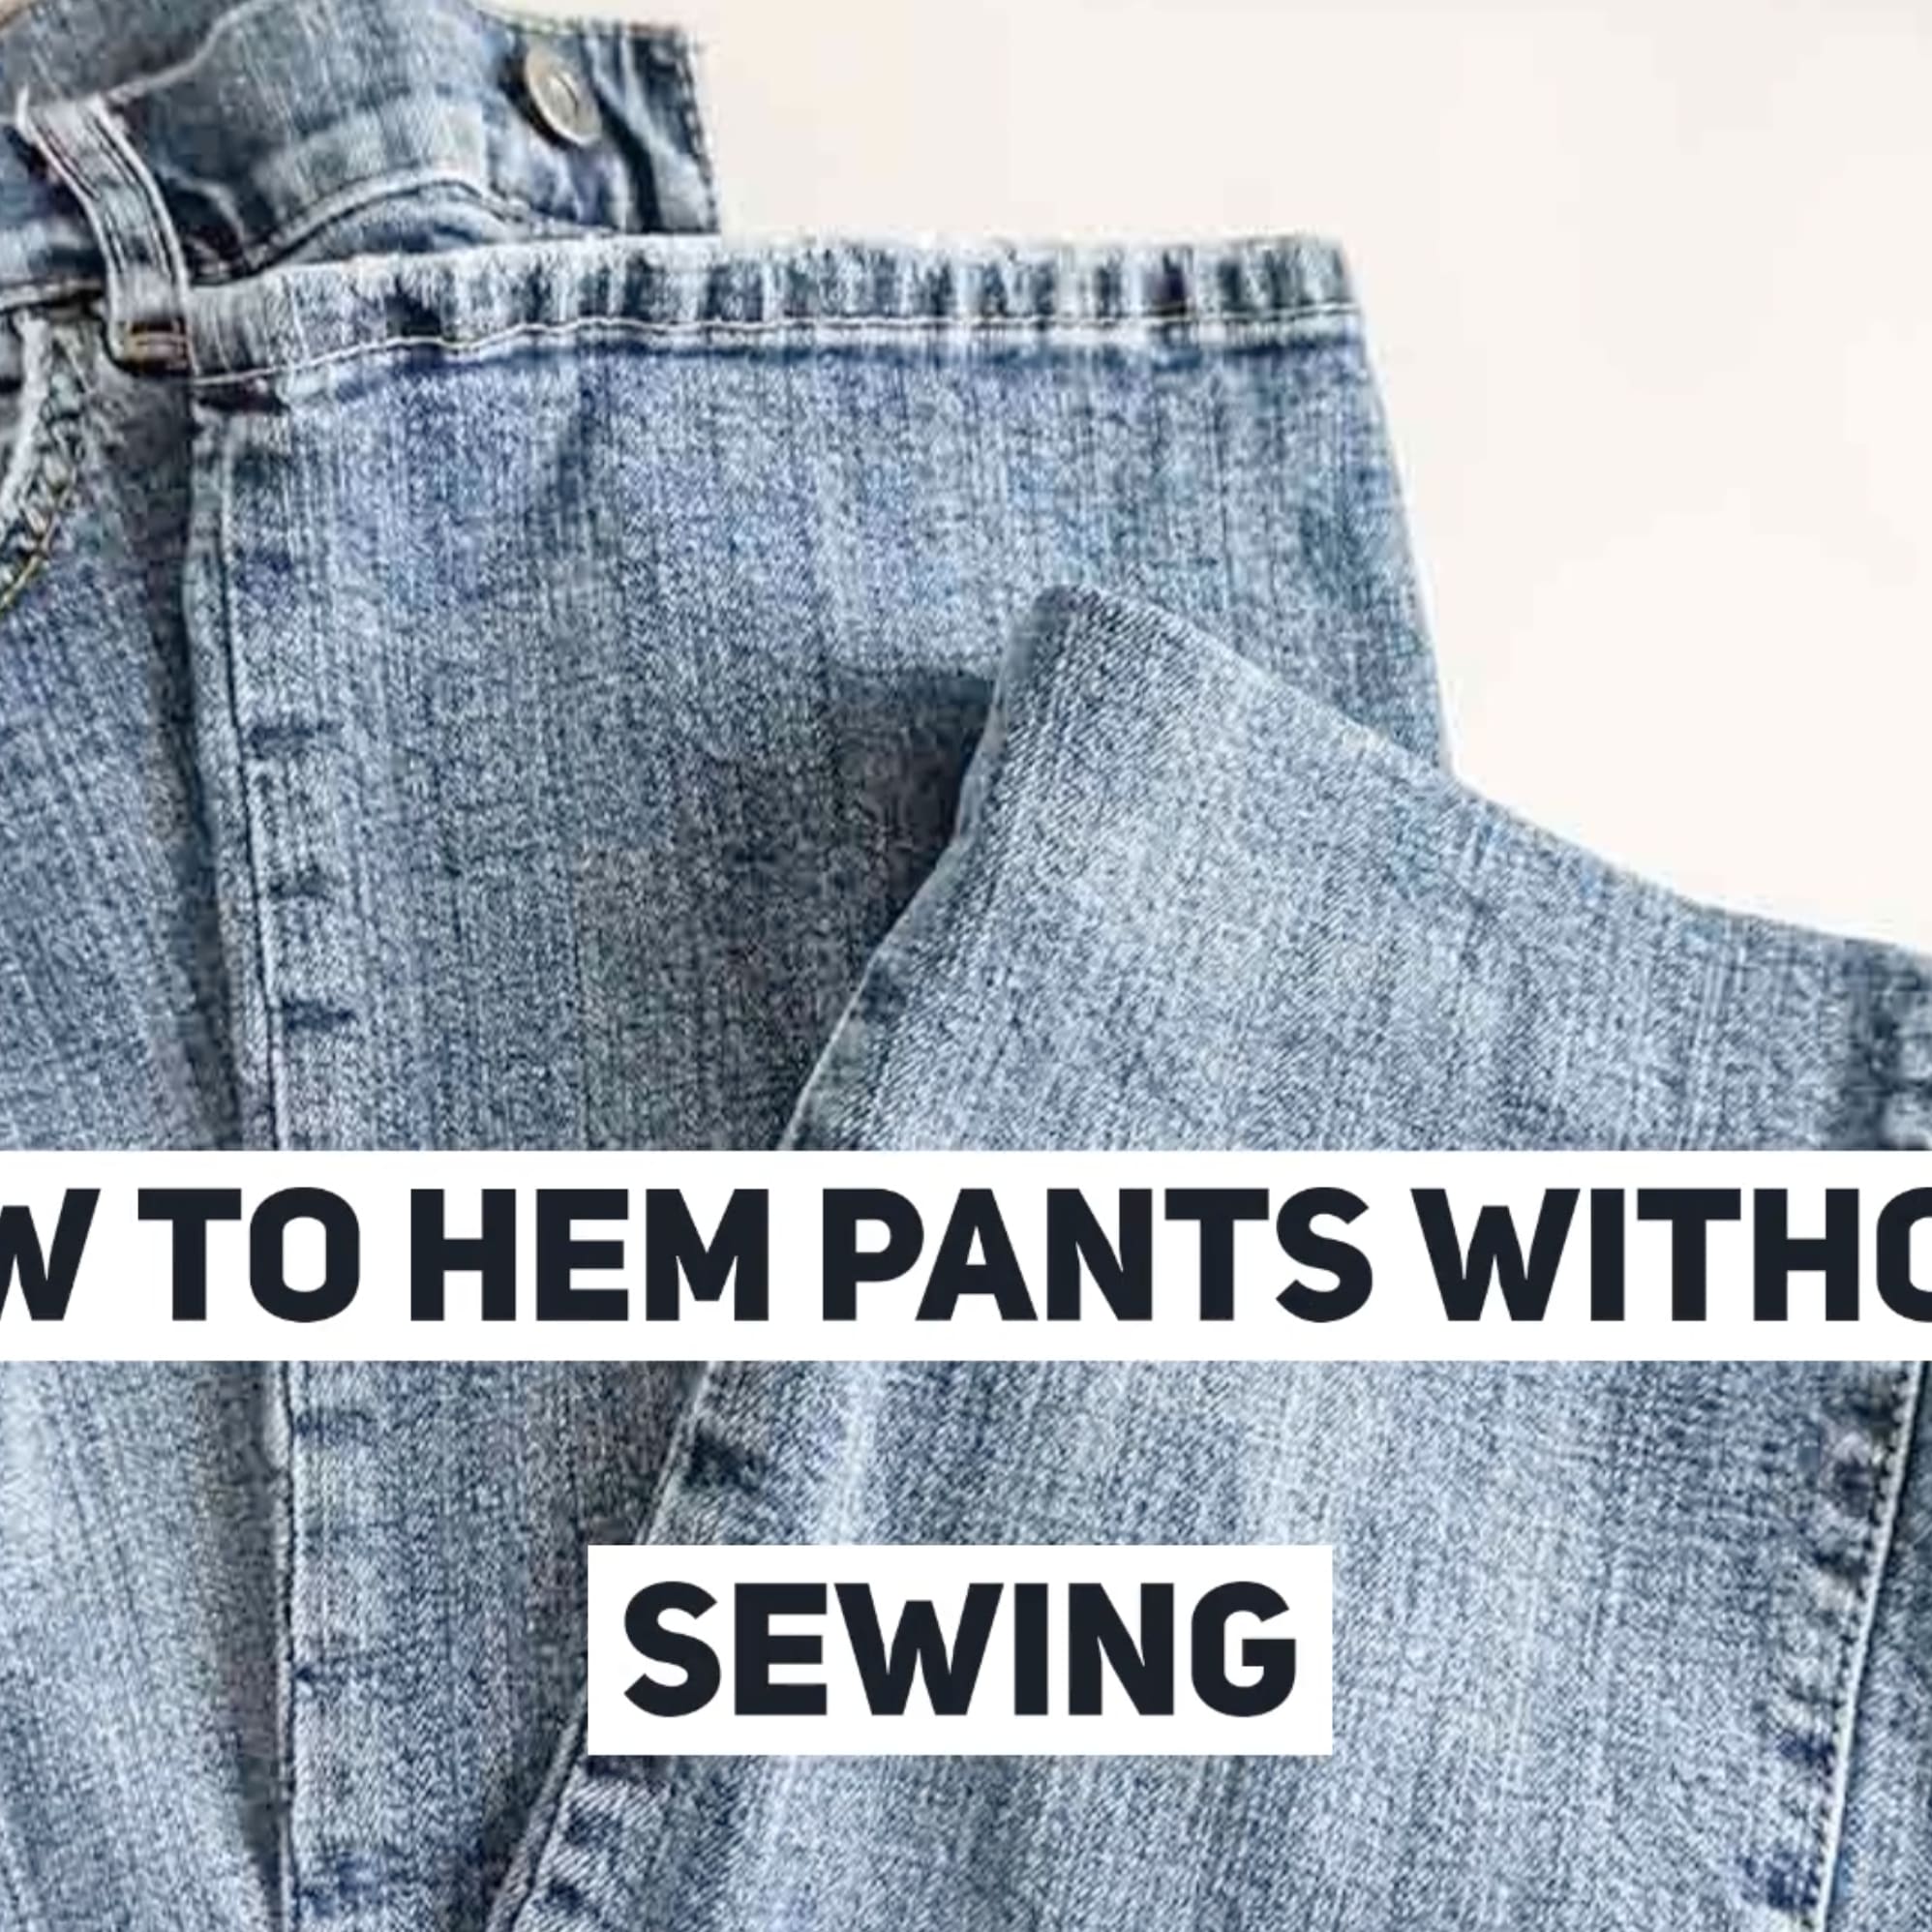 How to hem pants with or without a sewing machine, How to hem pants with  or without a sewing machine:, By 3-Minute Hacks